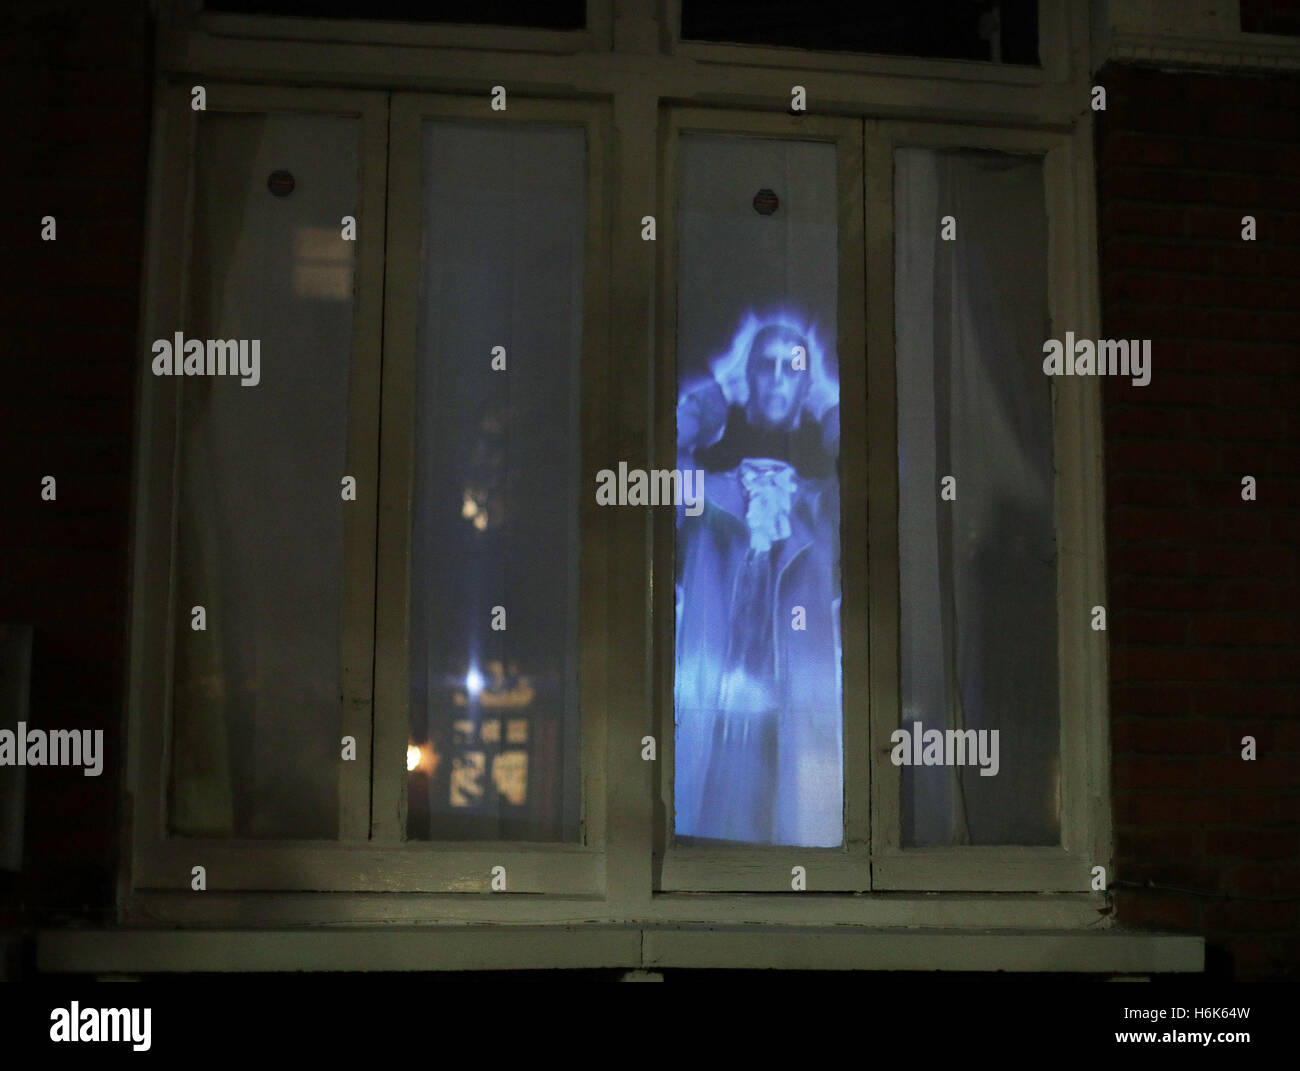 A Halloween Themed Projection Is Displayed In The Window Of A House In North London Ahead Of Halloween Celebrations Tomorrow Stock Photo Alamy